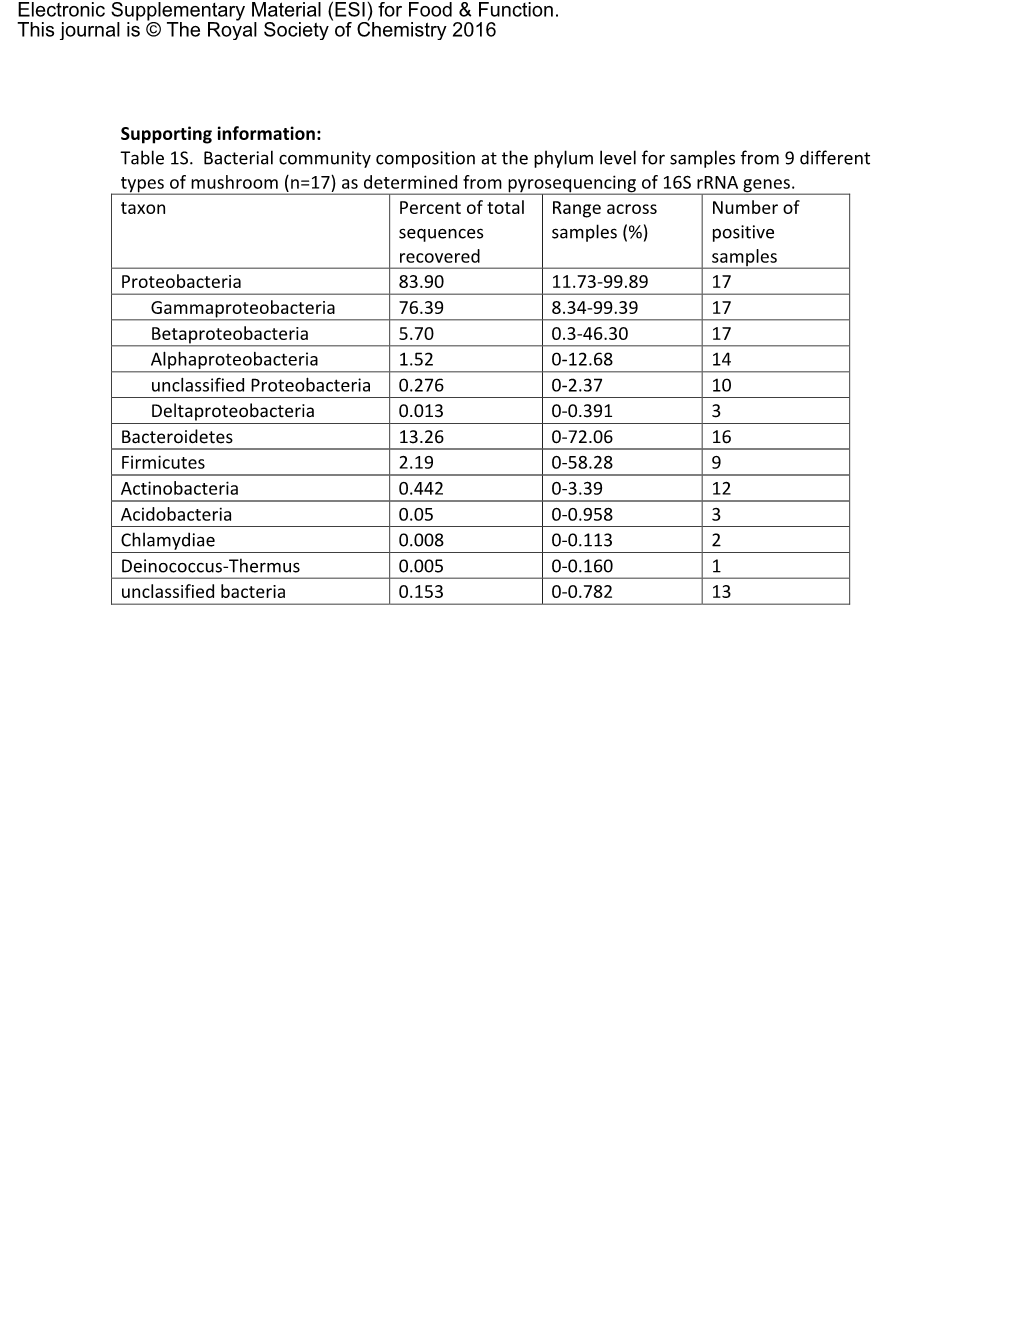 Table 1S. Bacterial Community Composition at the Phylum Level For